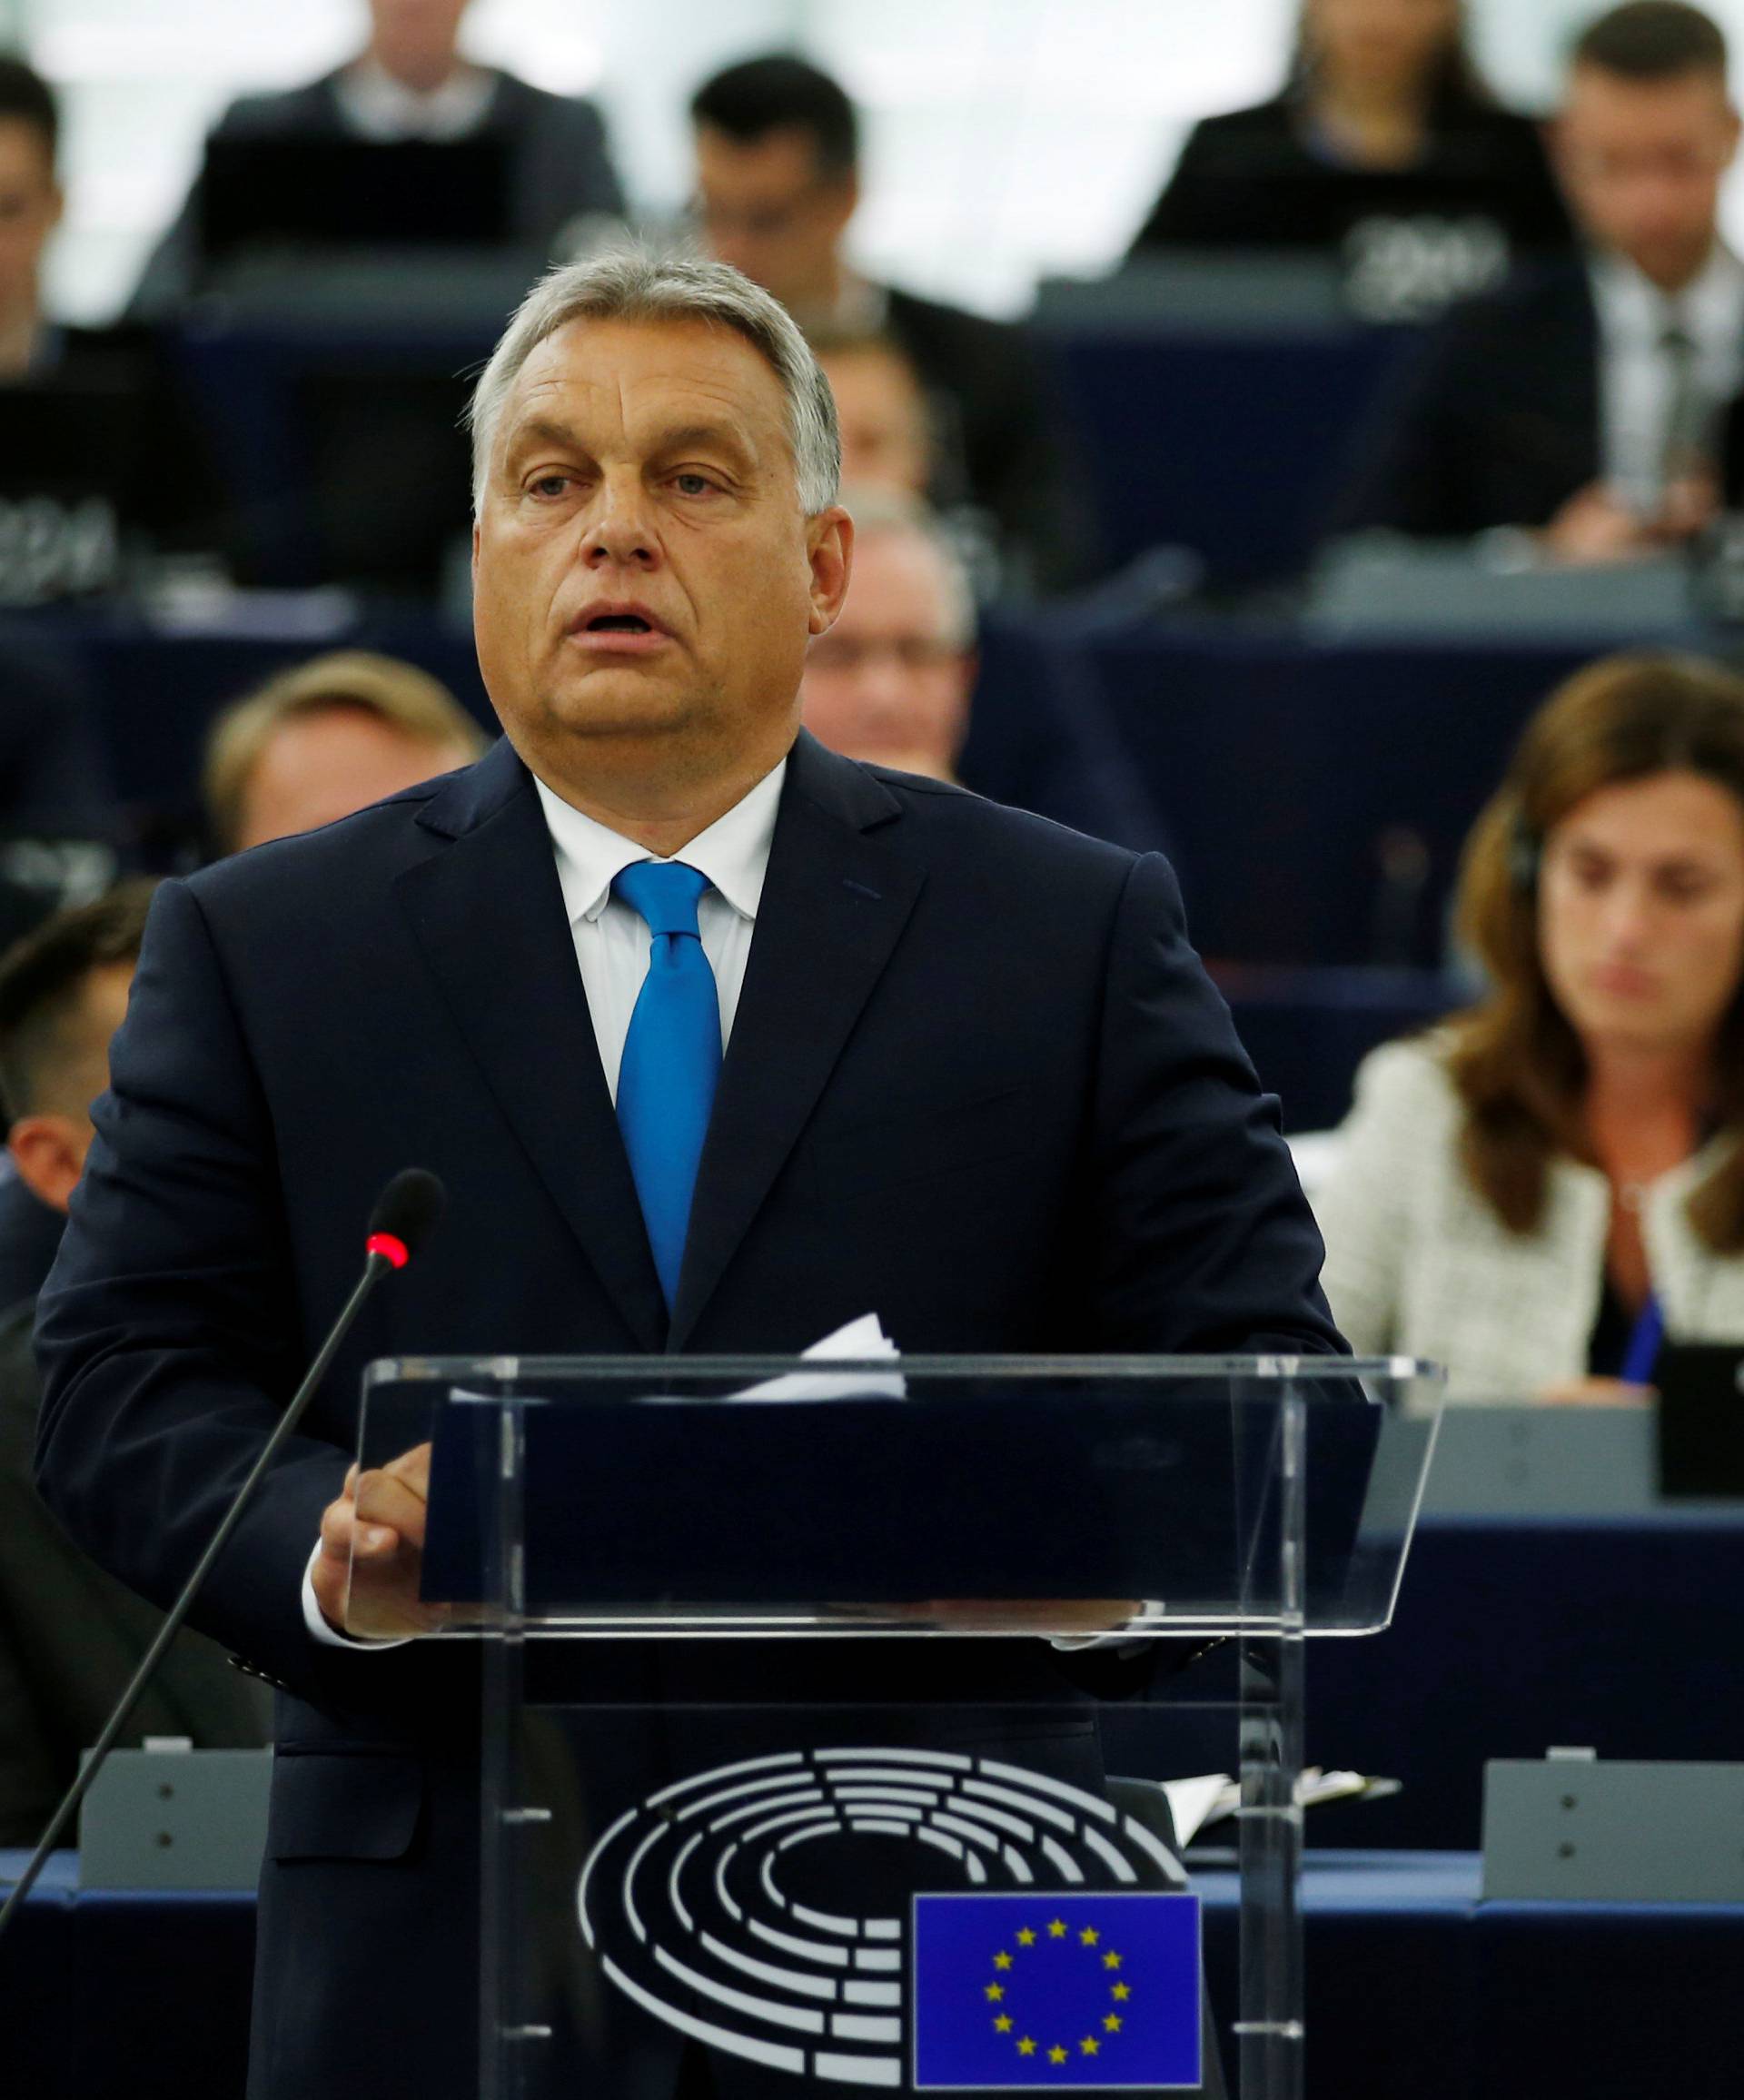 Hungarian Prime Minister Orban delivers a speech during a debate on the situation in Hungary at the European Parliament in Strasbourg